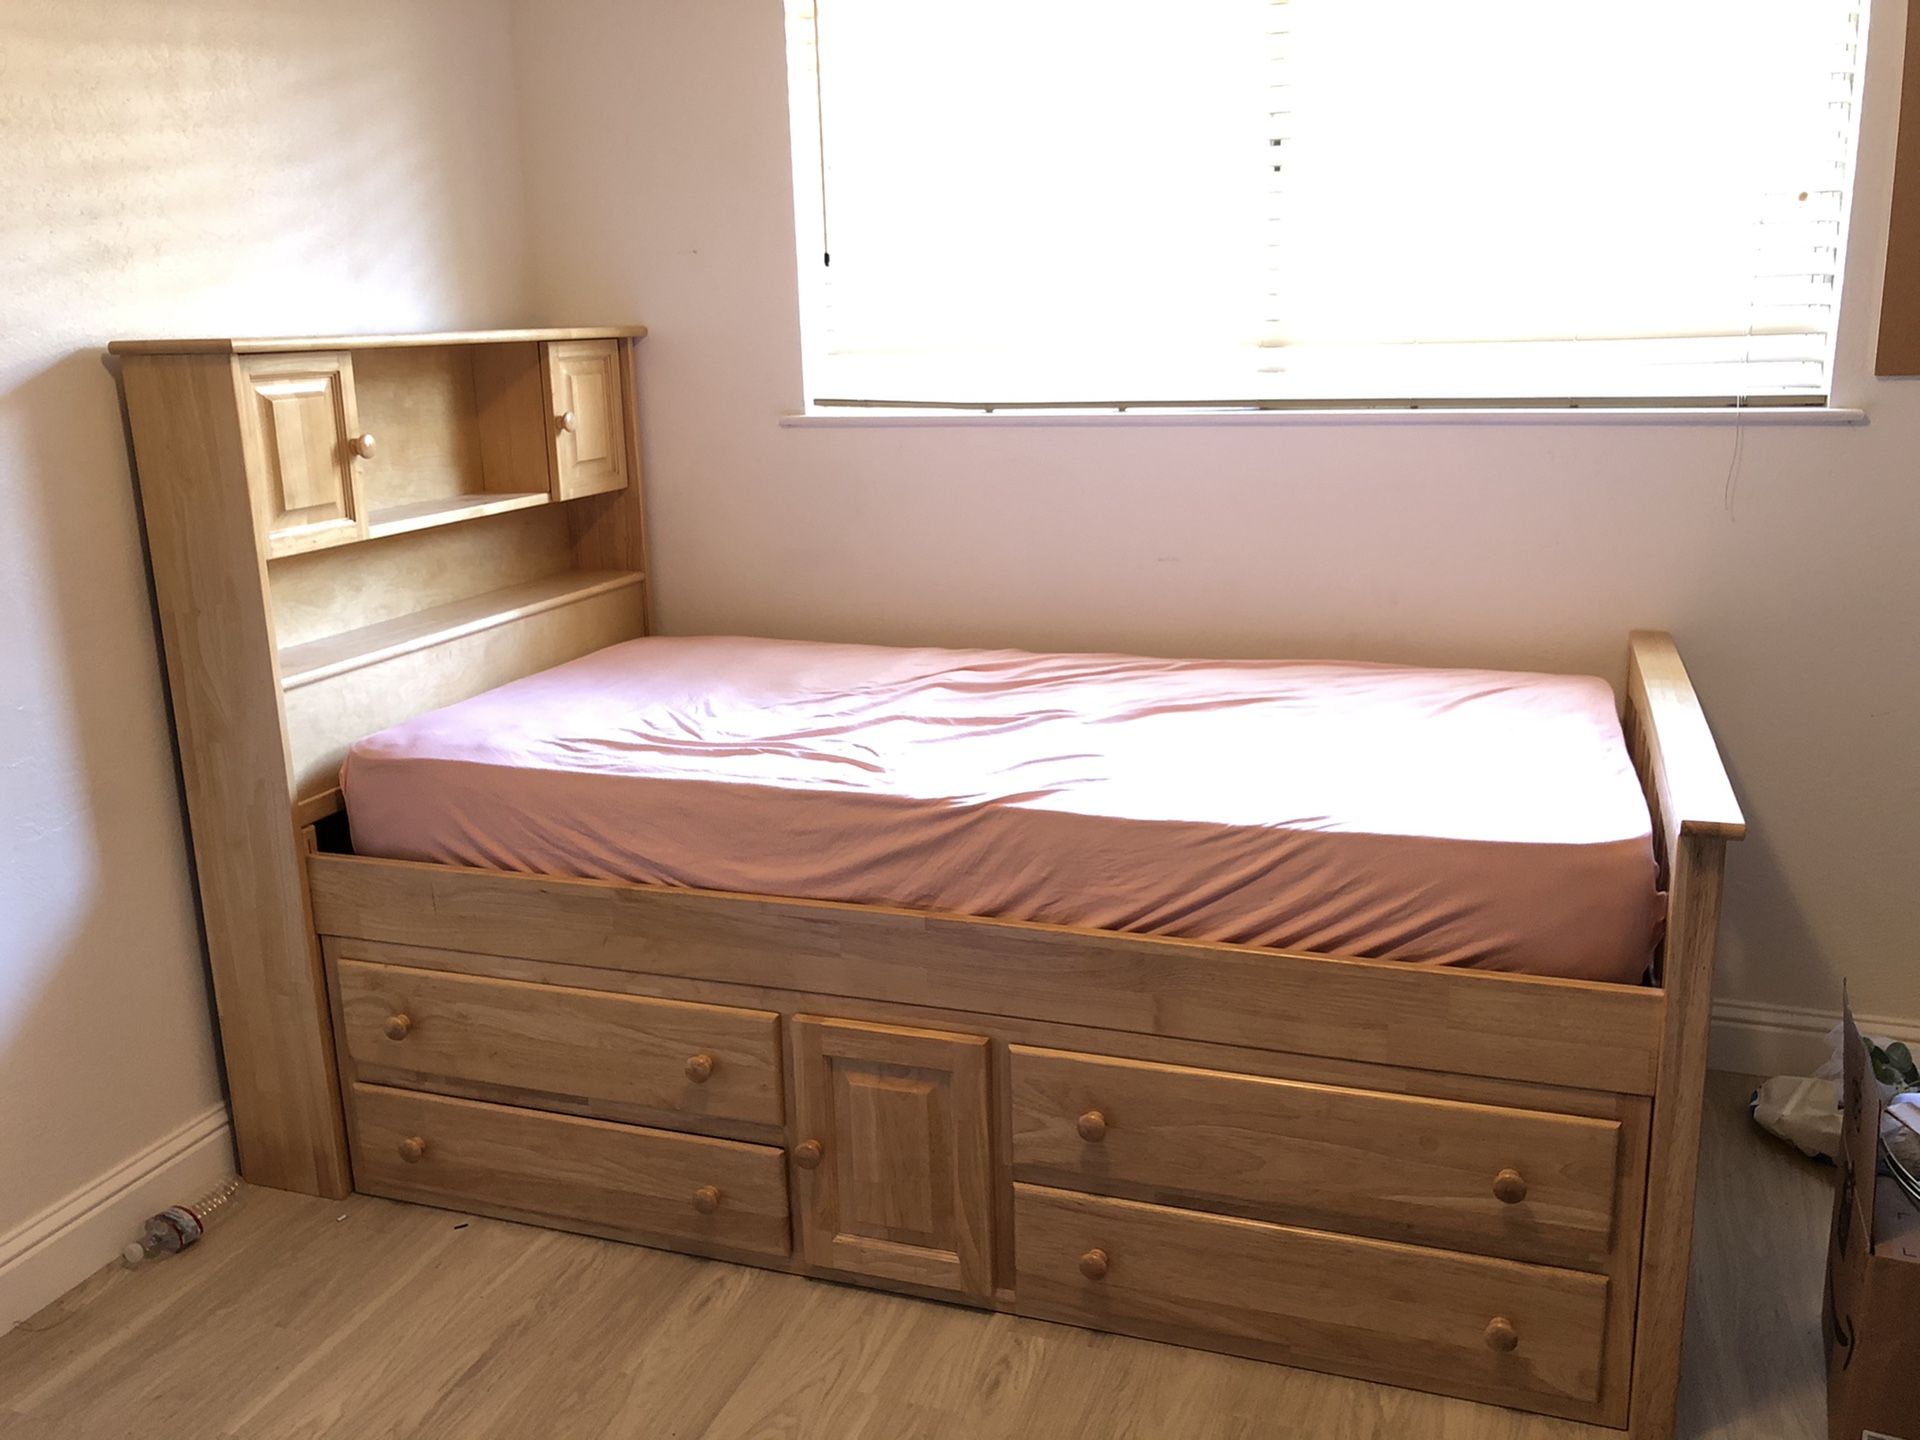 Captain’s Bed - twin size, solid wood